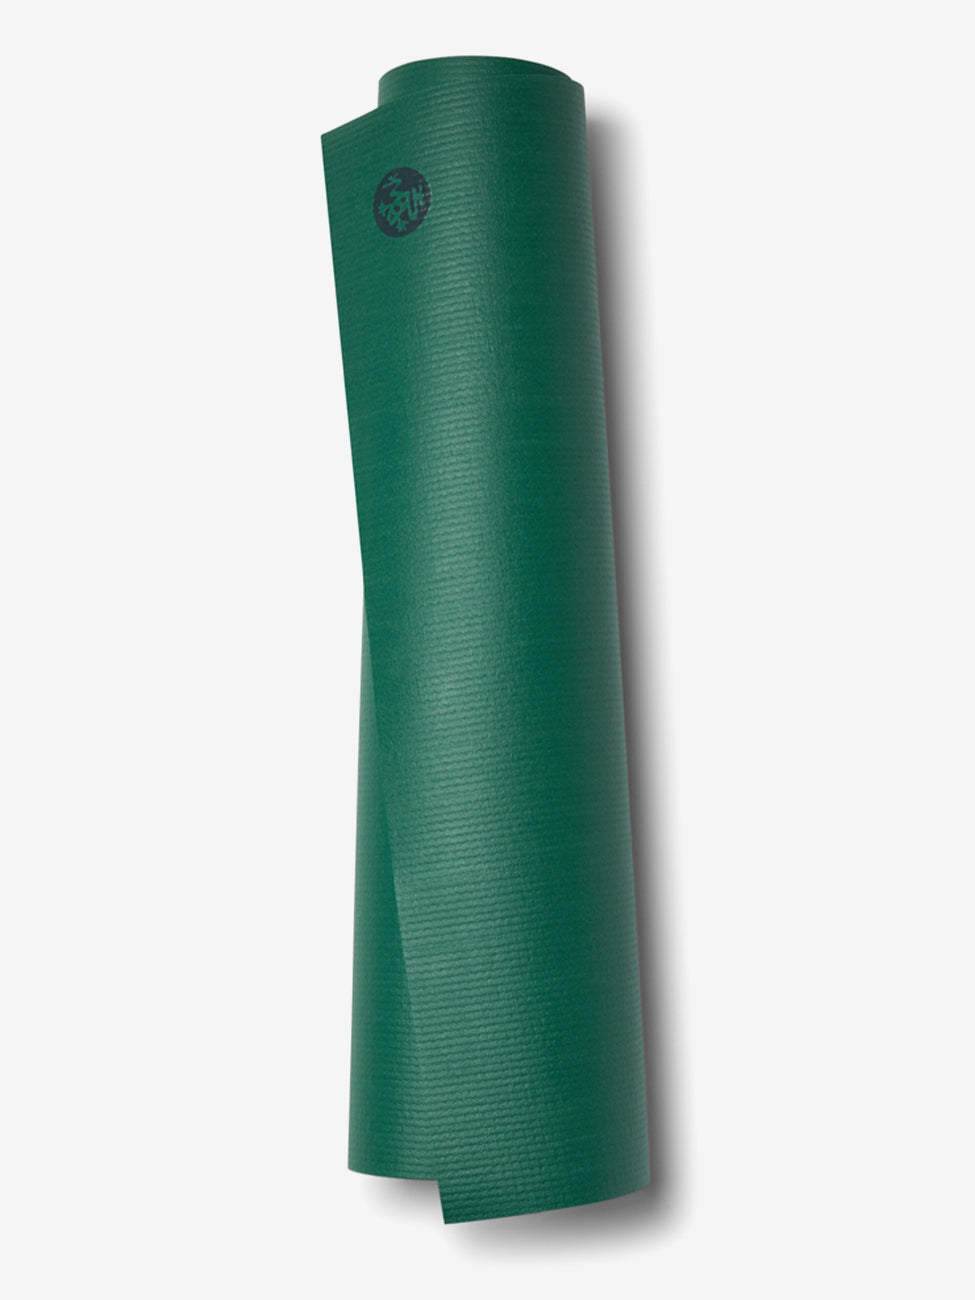 Green textured yoga mat rolled up against a white background with visible brand logo on upper part, eco-friendly material, non-slip surface, exercise and fitness accessory, side view.